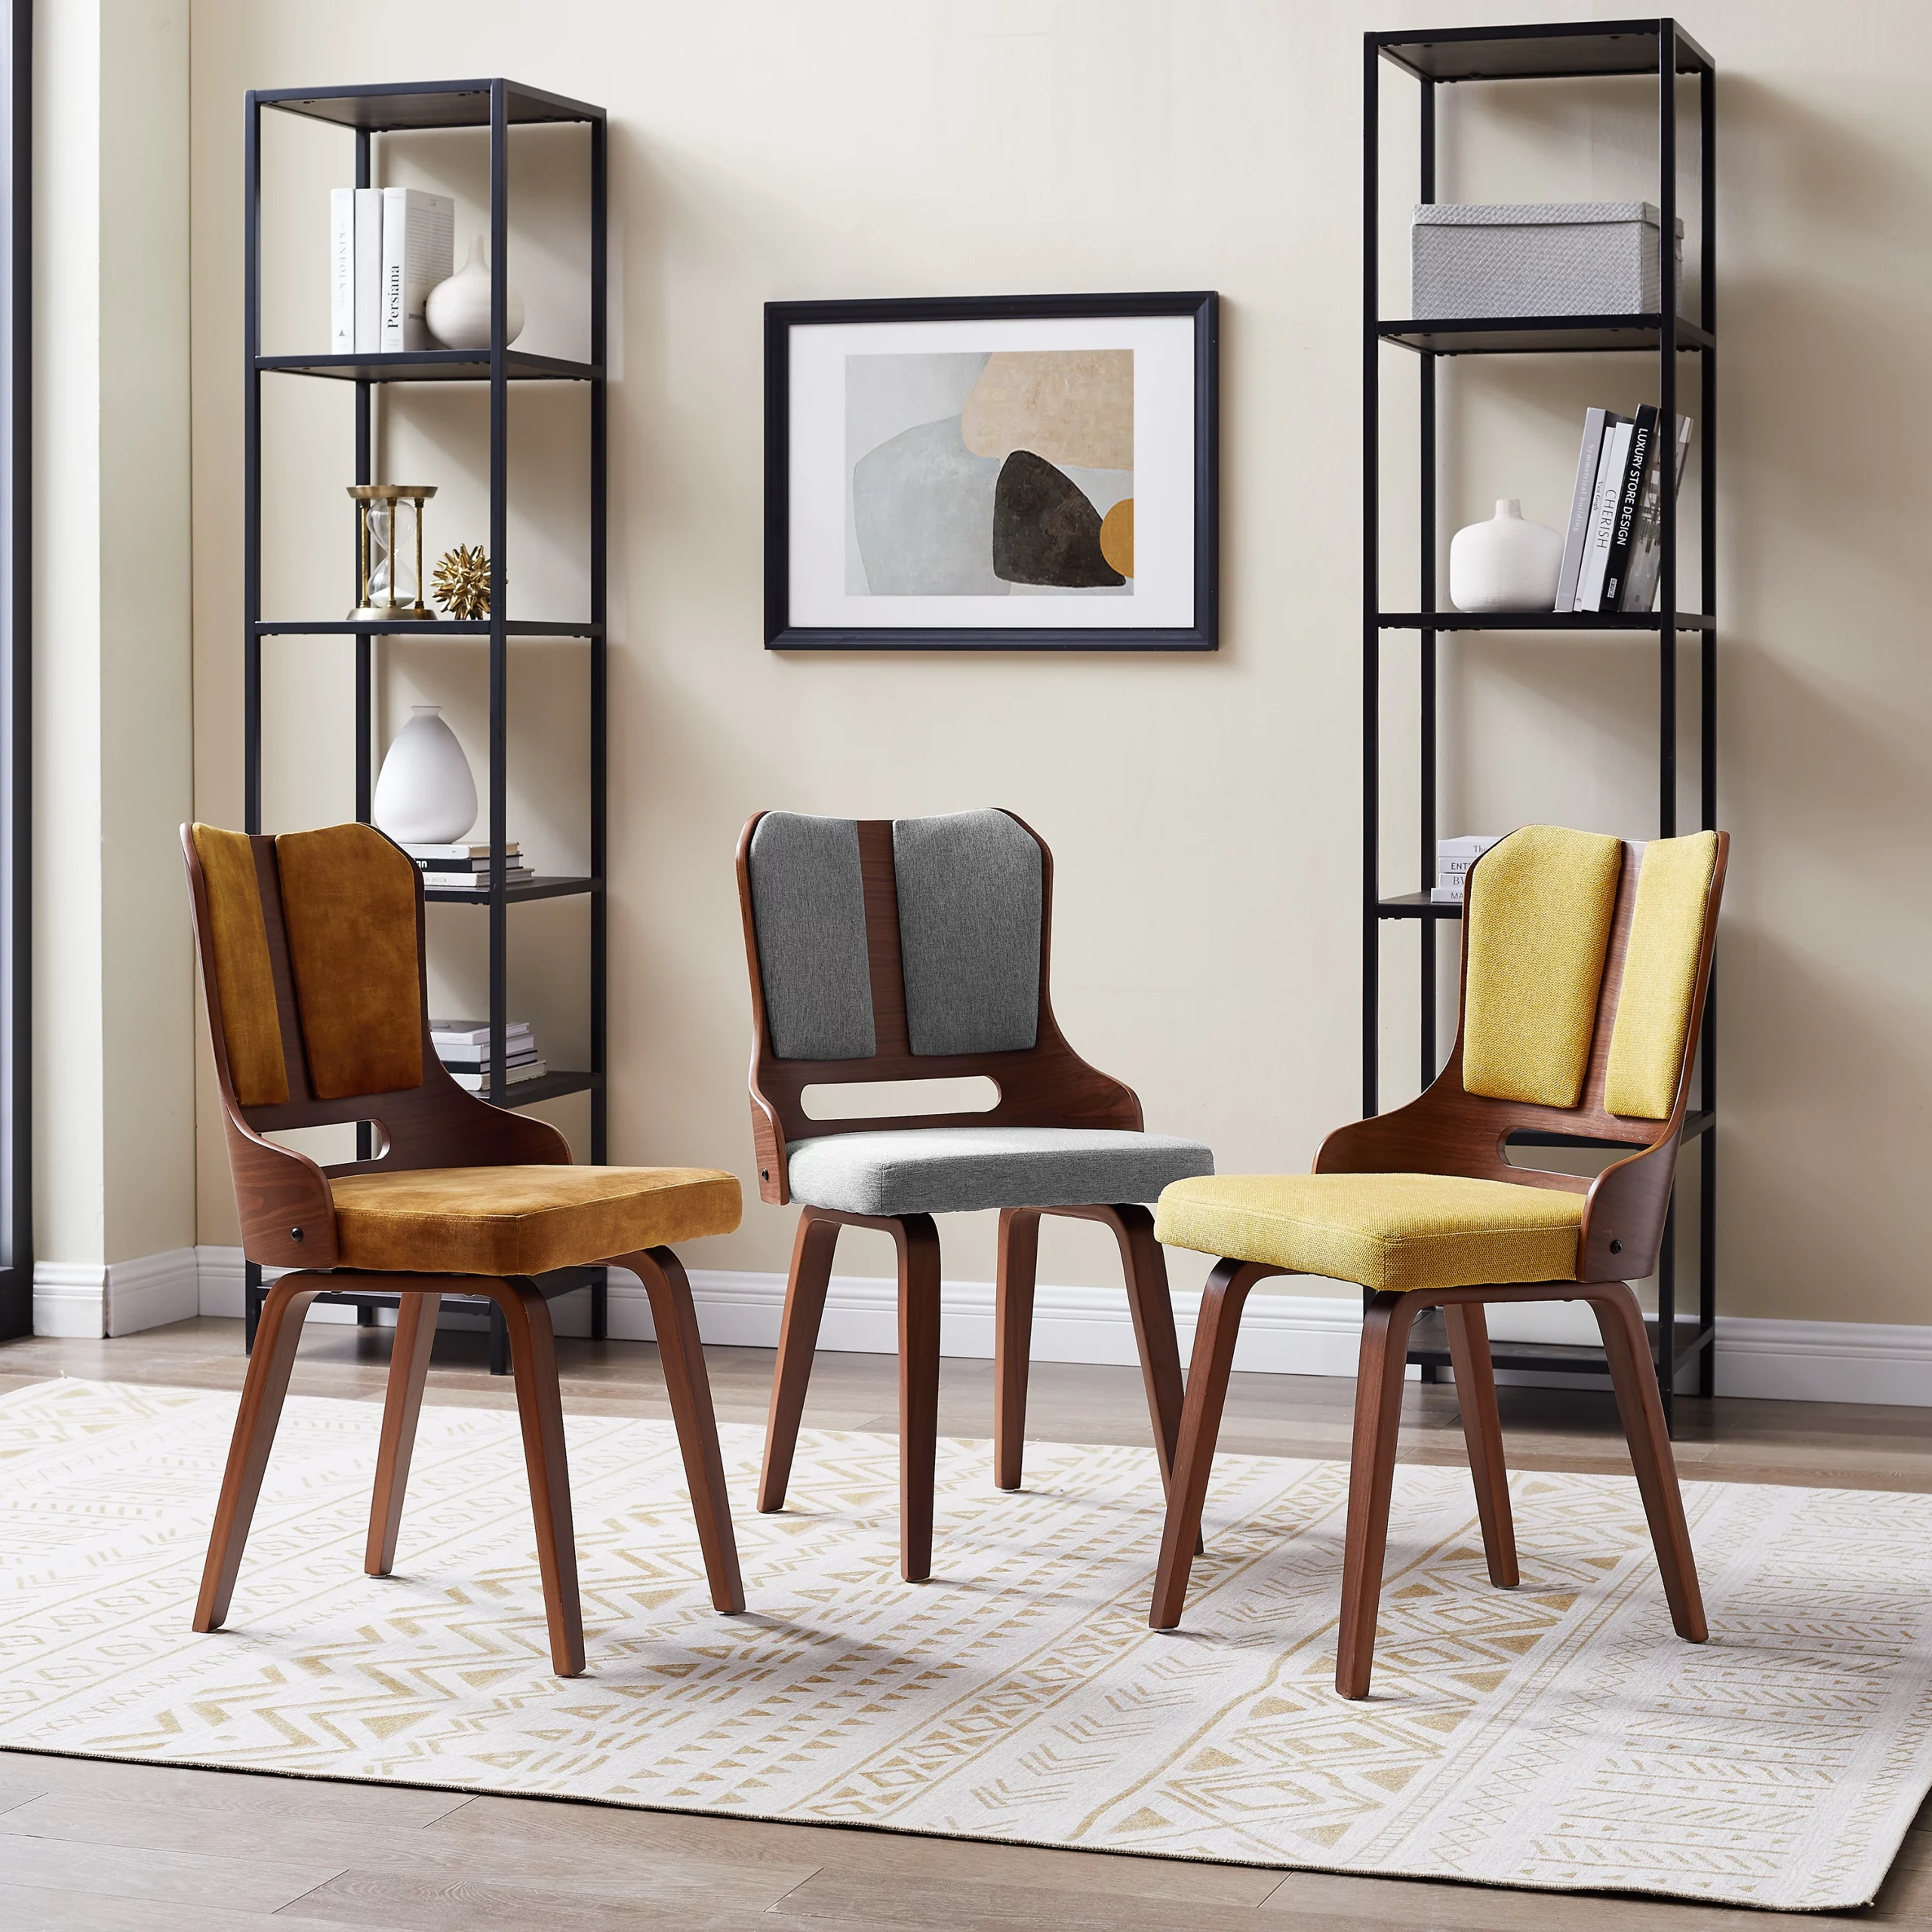 Bring in High Style with These Upholstered Chairs